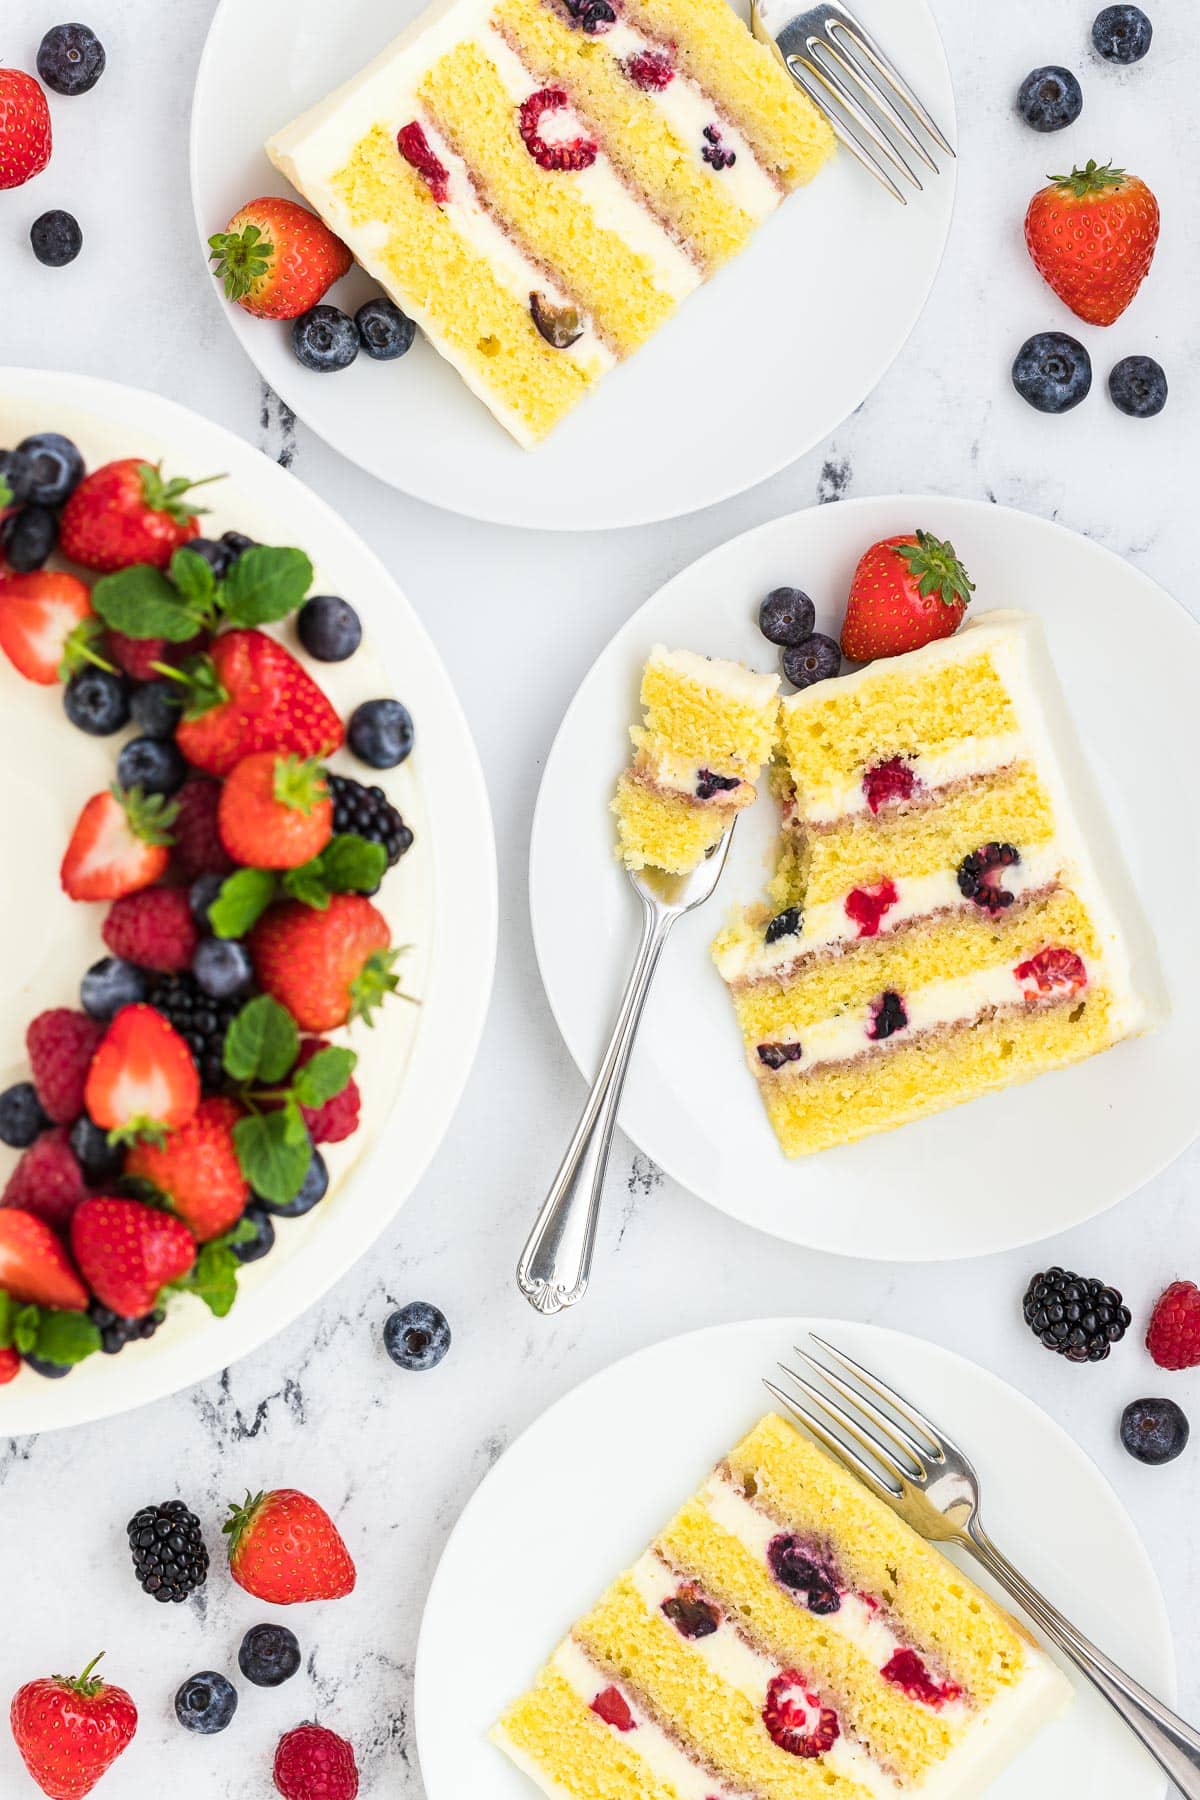 Slices of berry chantilly cake with a fork in one slice.